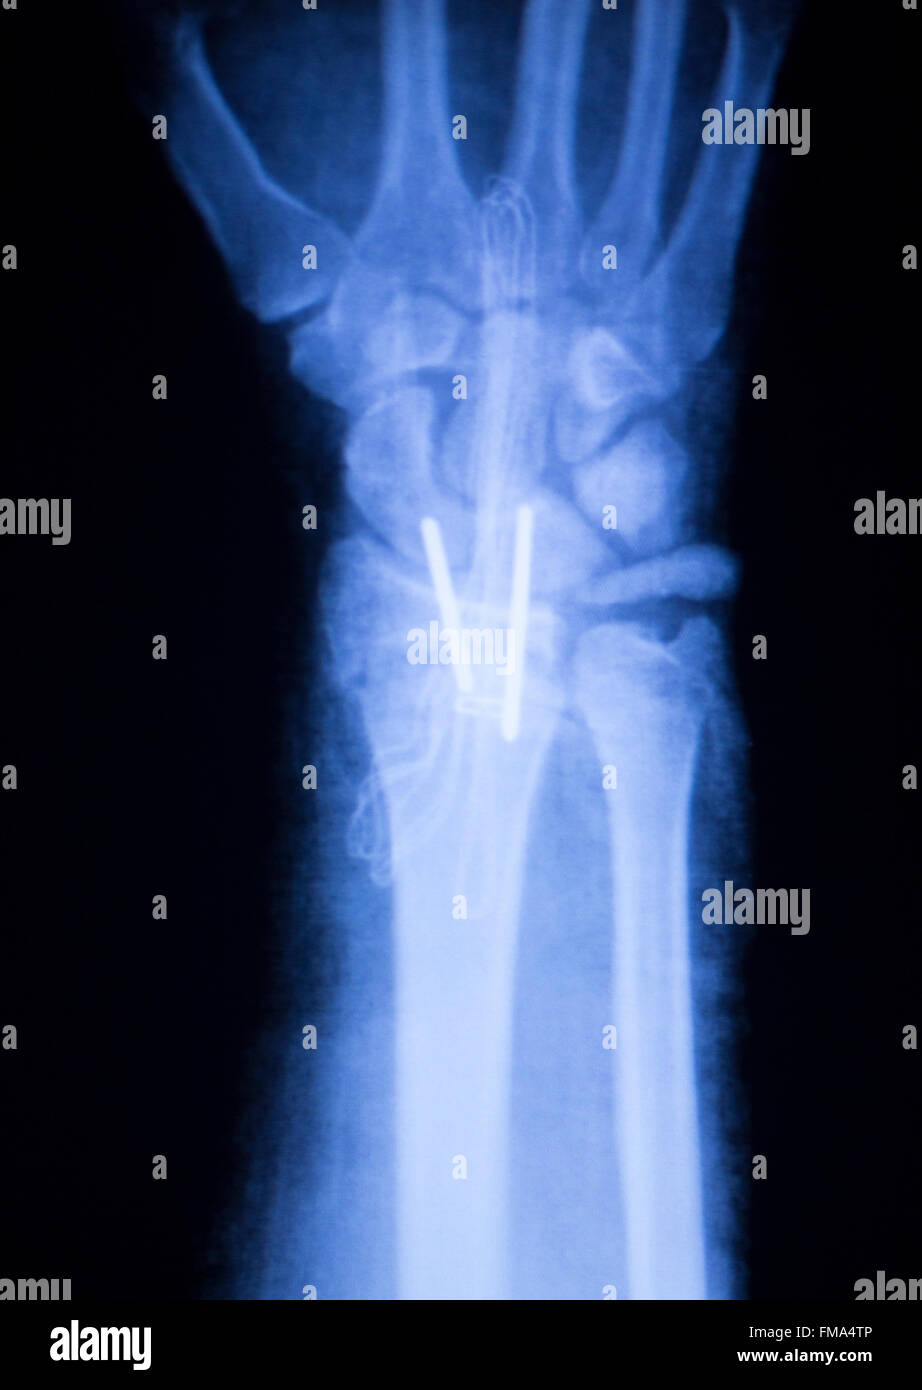 Forearm orthopedic titanium metal replacement implant xray scan test results. Stock Photo